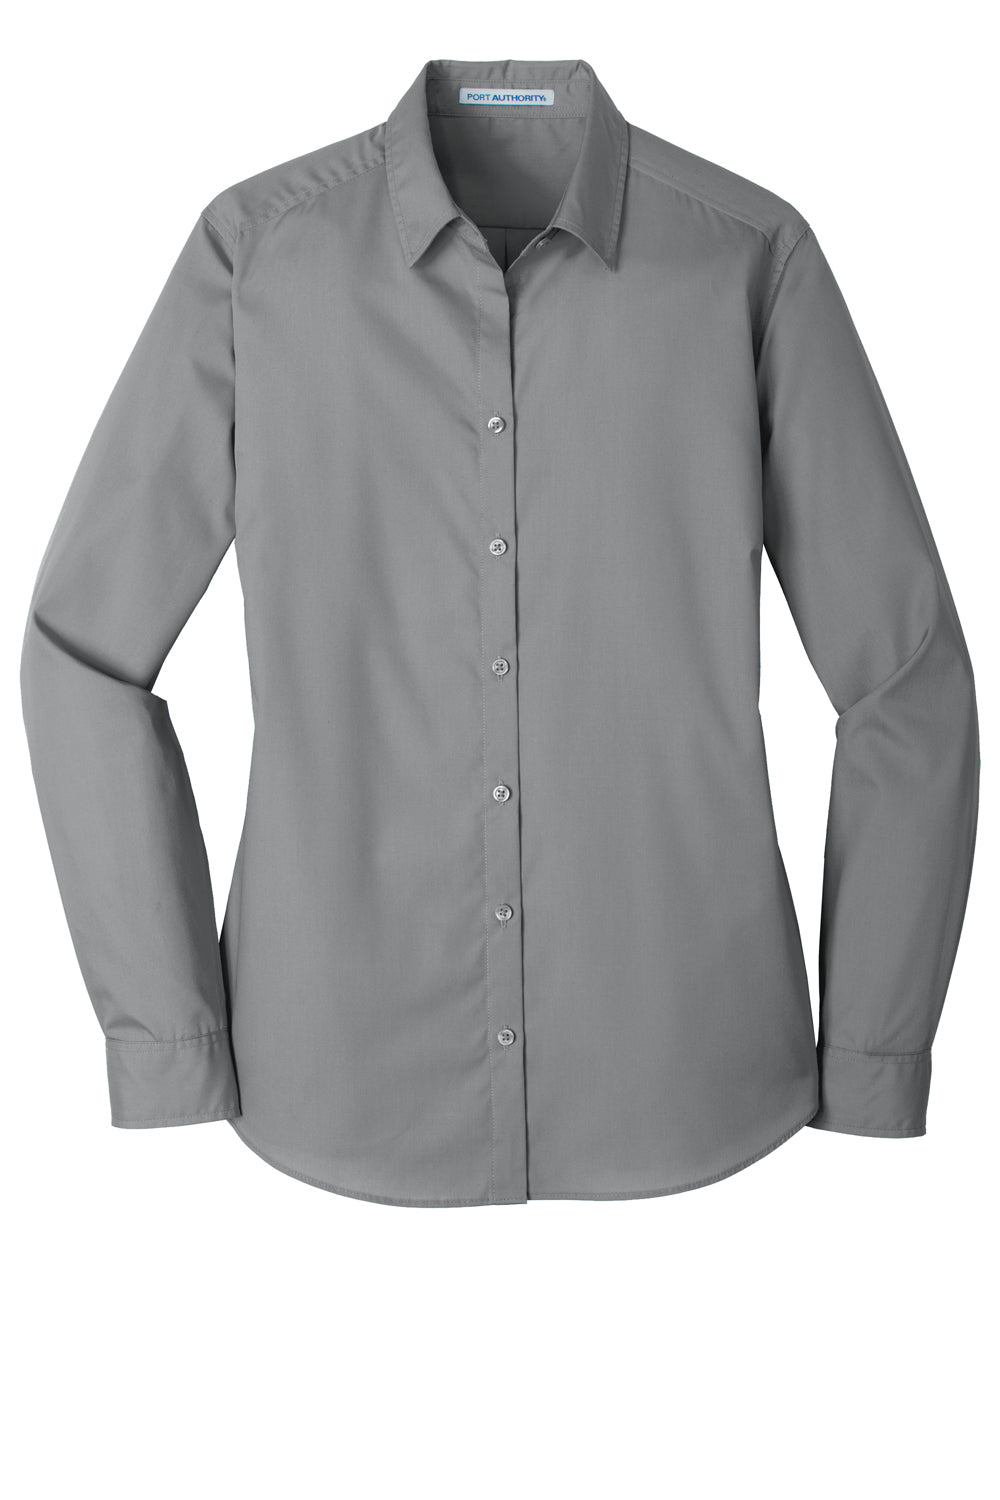 Port Authority LW100 Womens Carefree Stain Resistant Long Sleeve Button Down Shirt Gusty Grey Flat Front